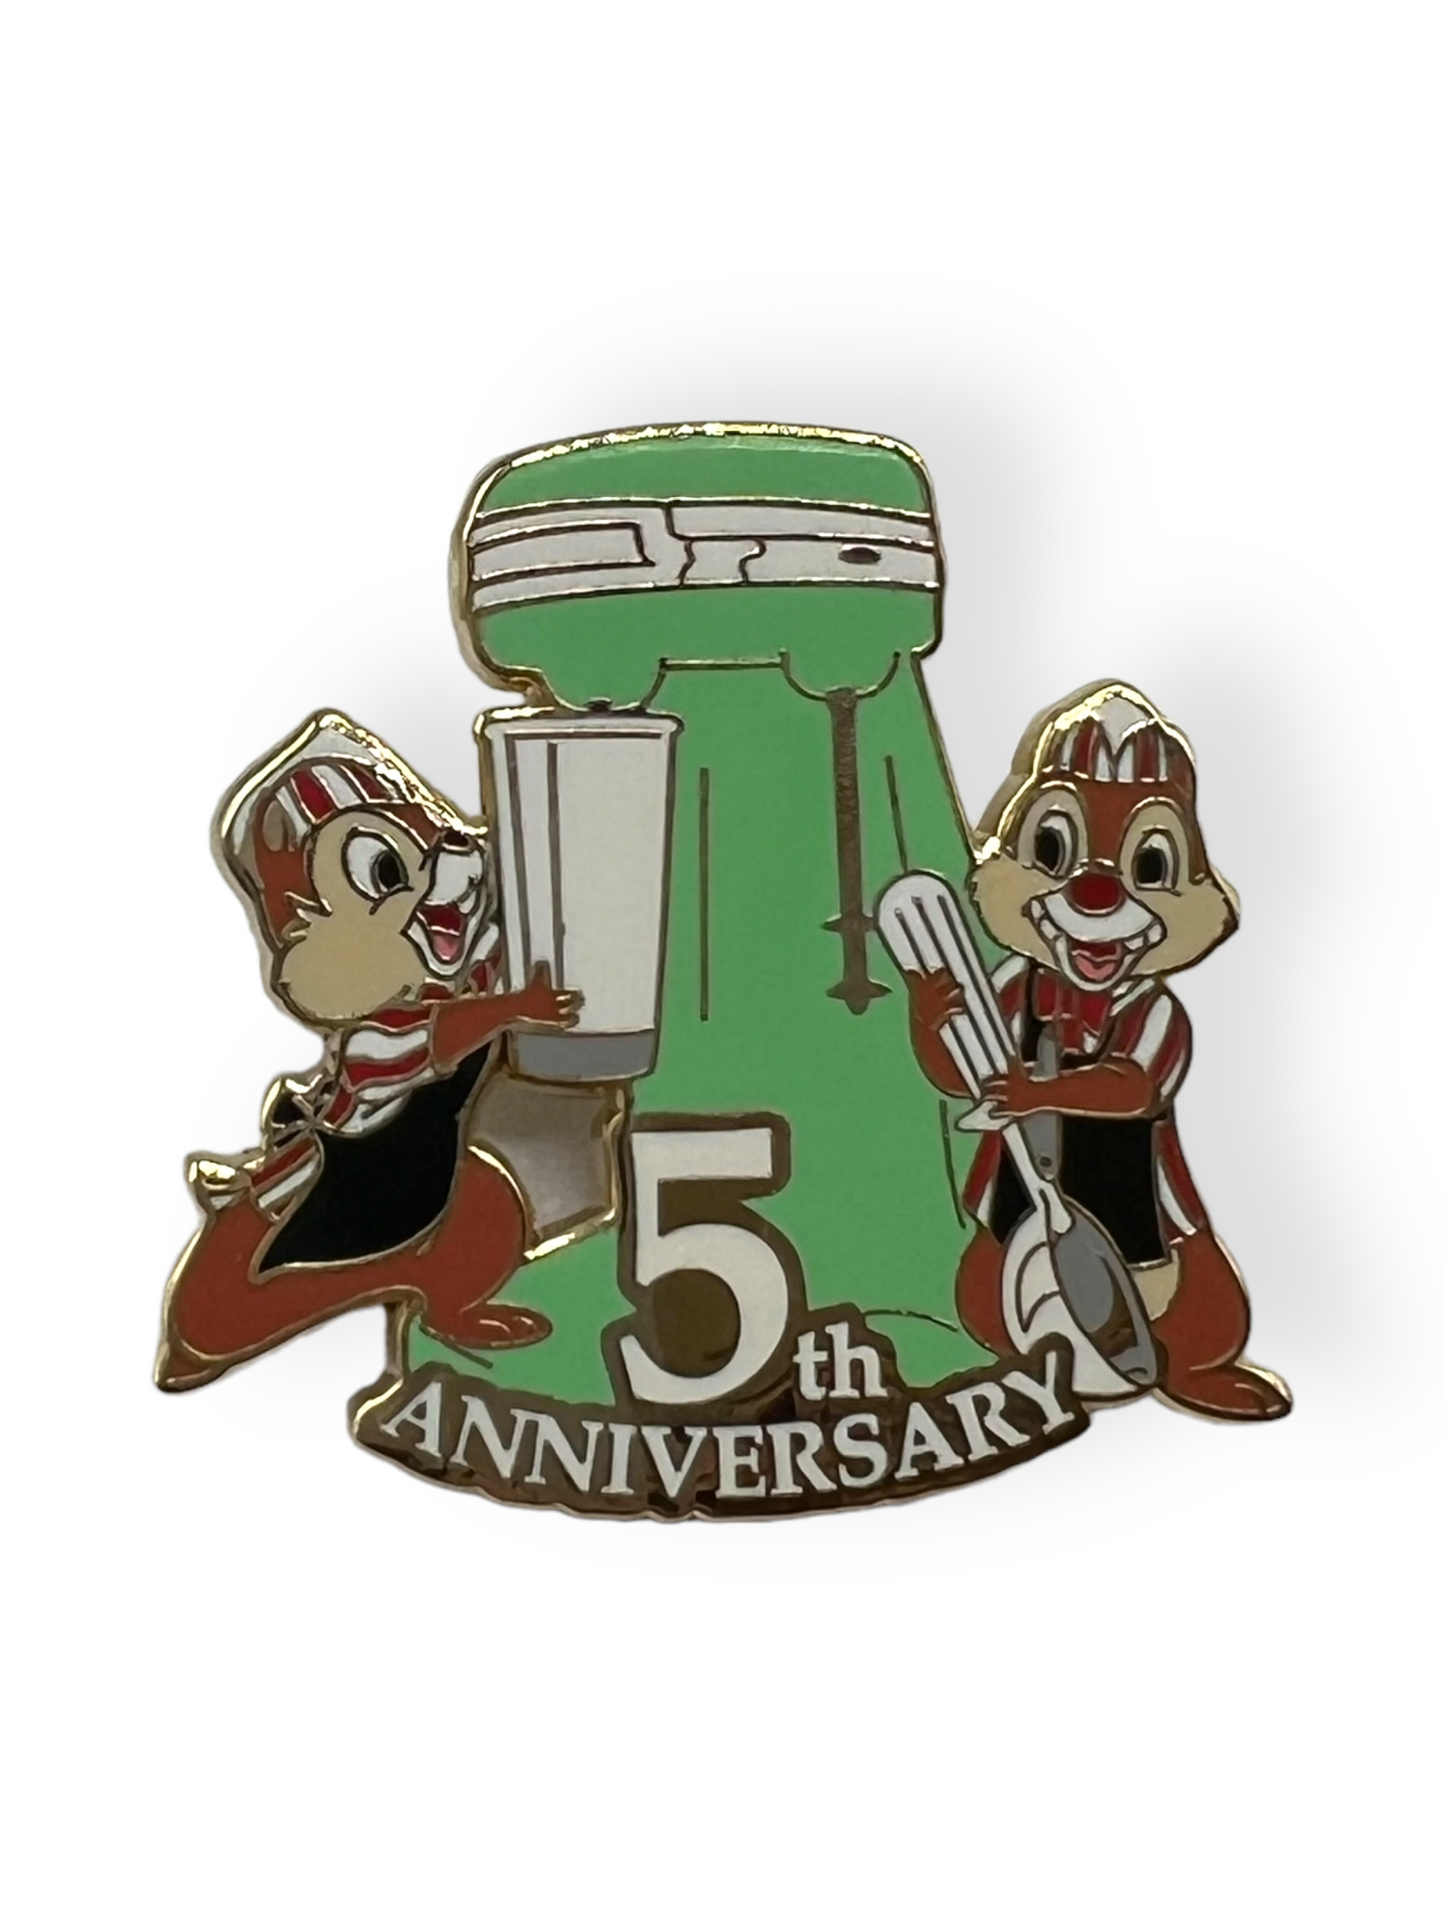 DSSH 5th Anniversary Chip n Dale Pin and Lanyard Set